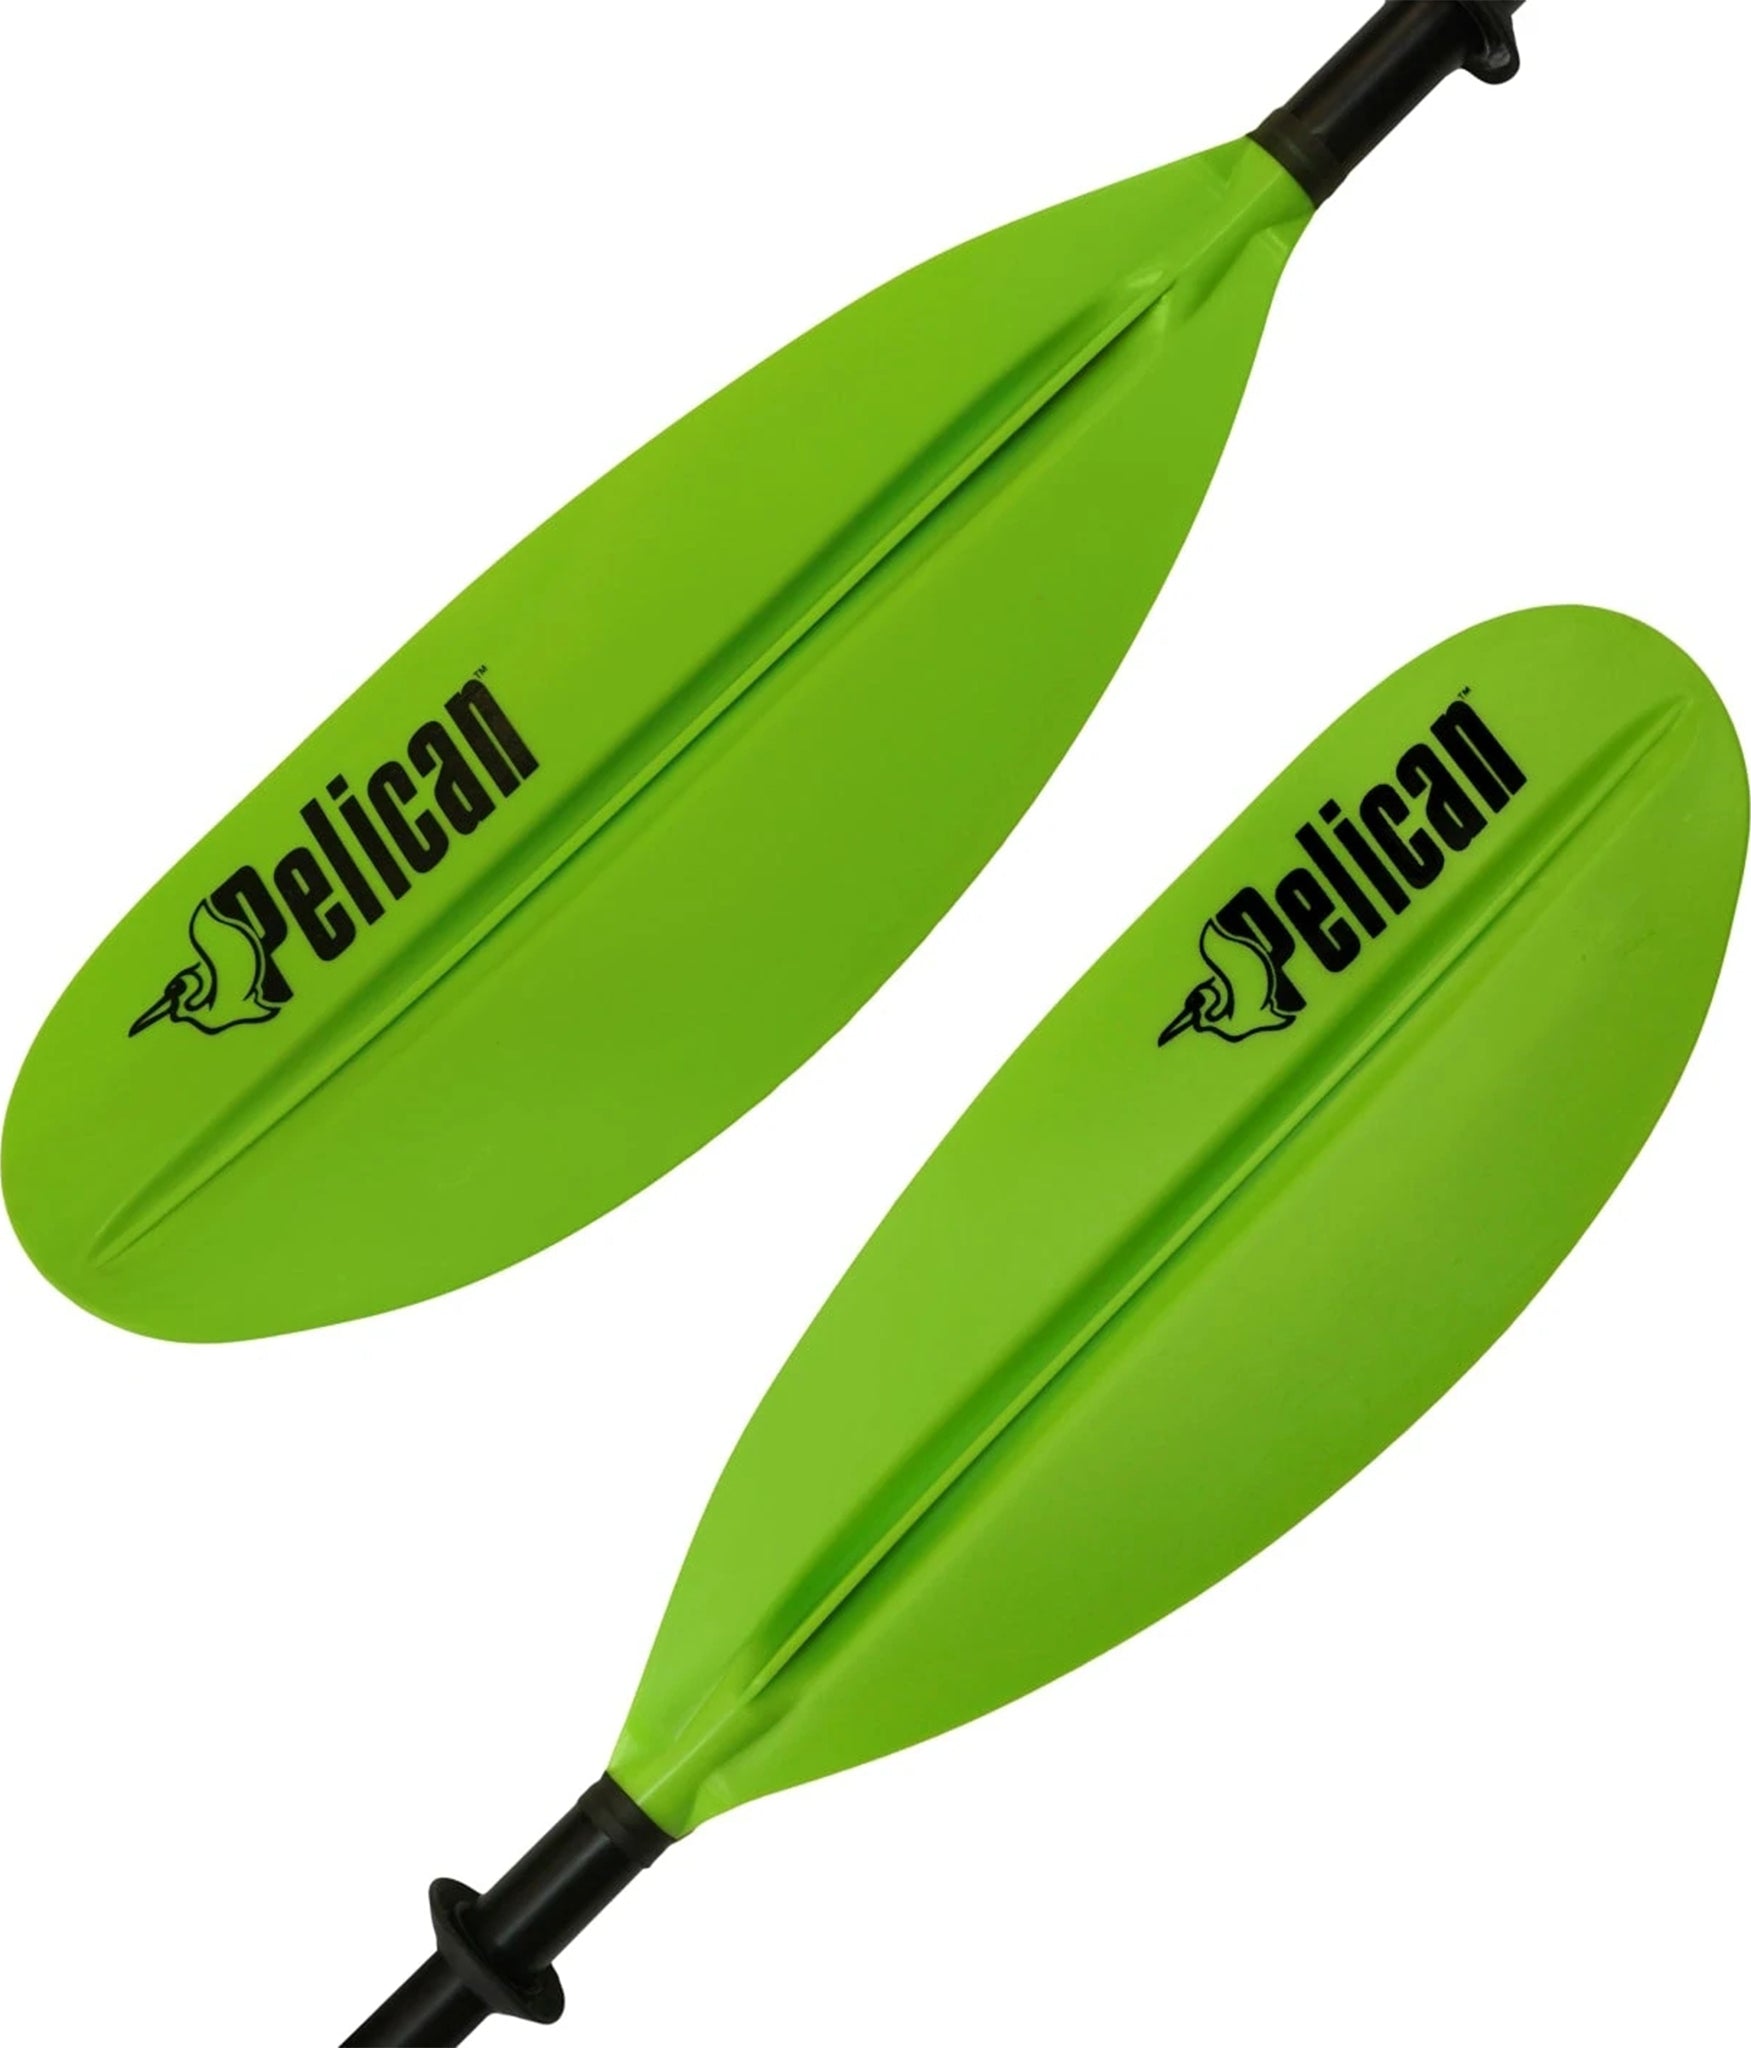 Pelican Sports Standard Kayak Paddle - 220cm OS Lime